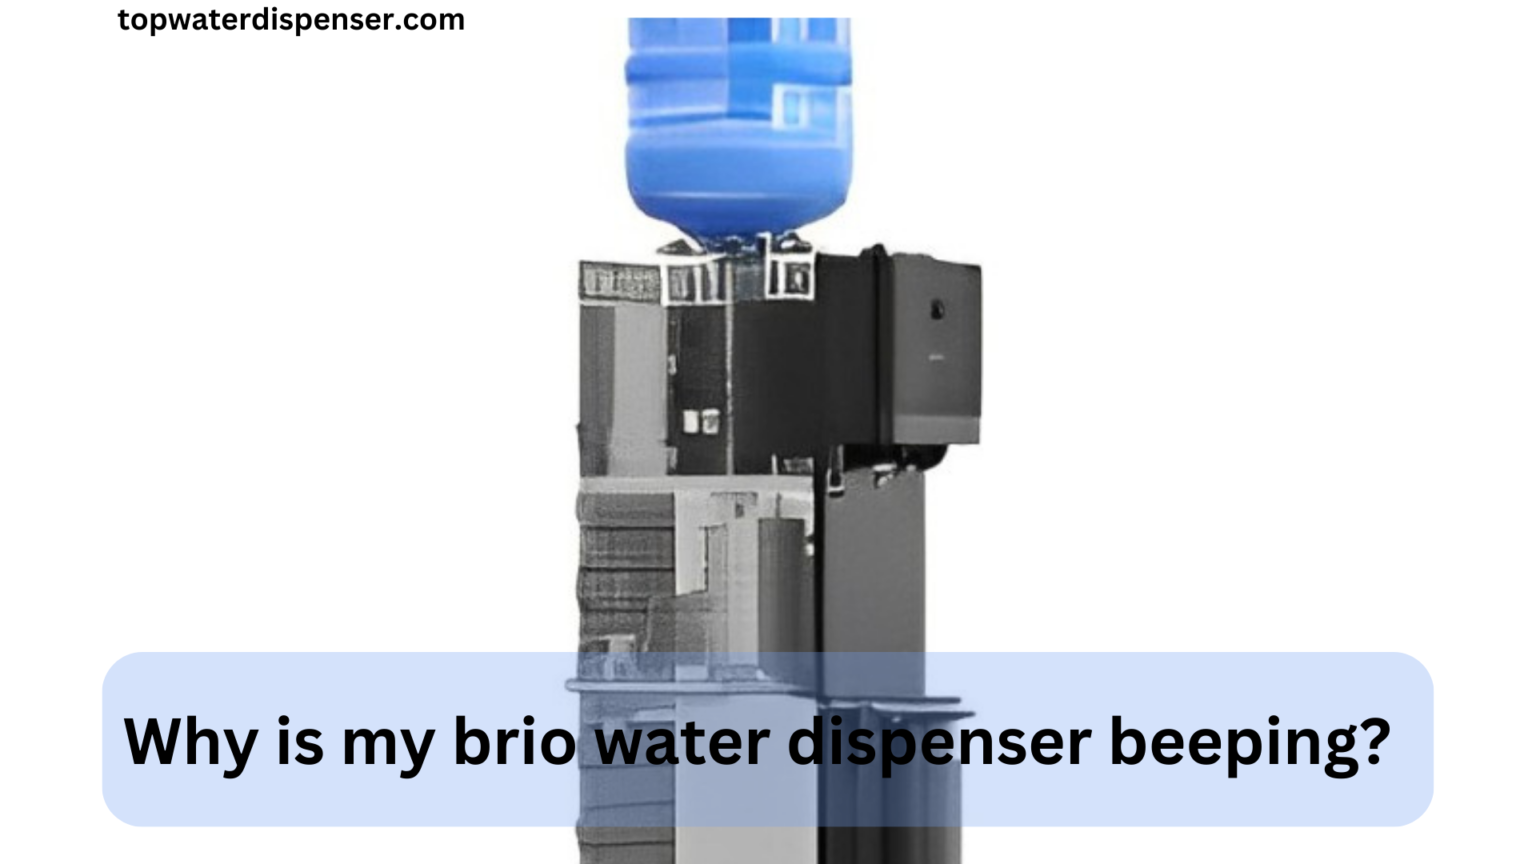 Why is my brio water dispenser beeping?